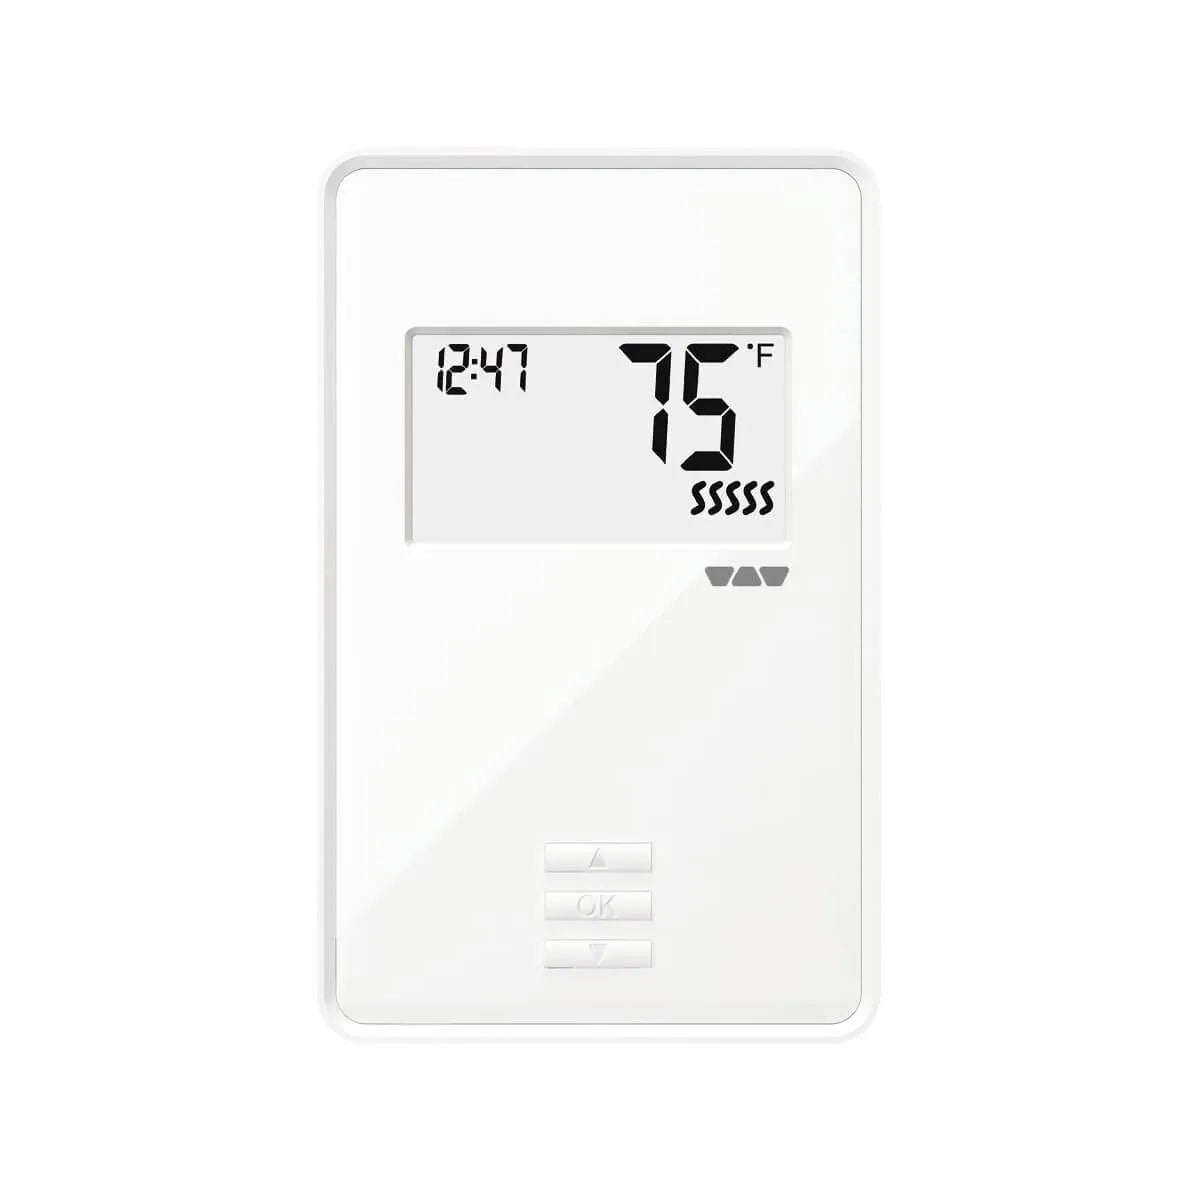 Schluter DITRA-HEAT-E-R Non-Programmable Thermostat